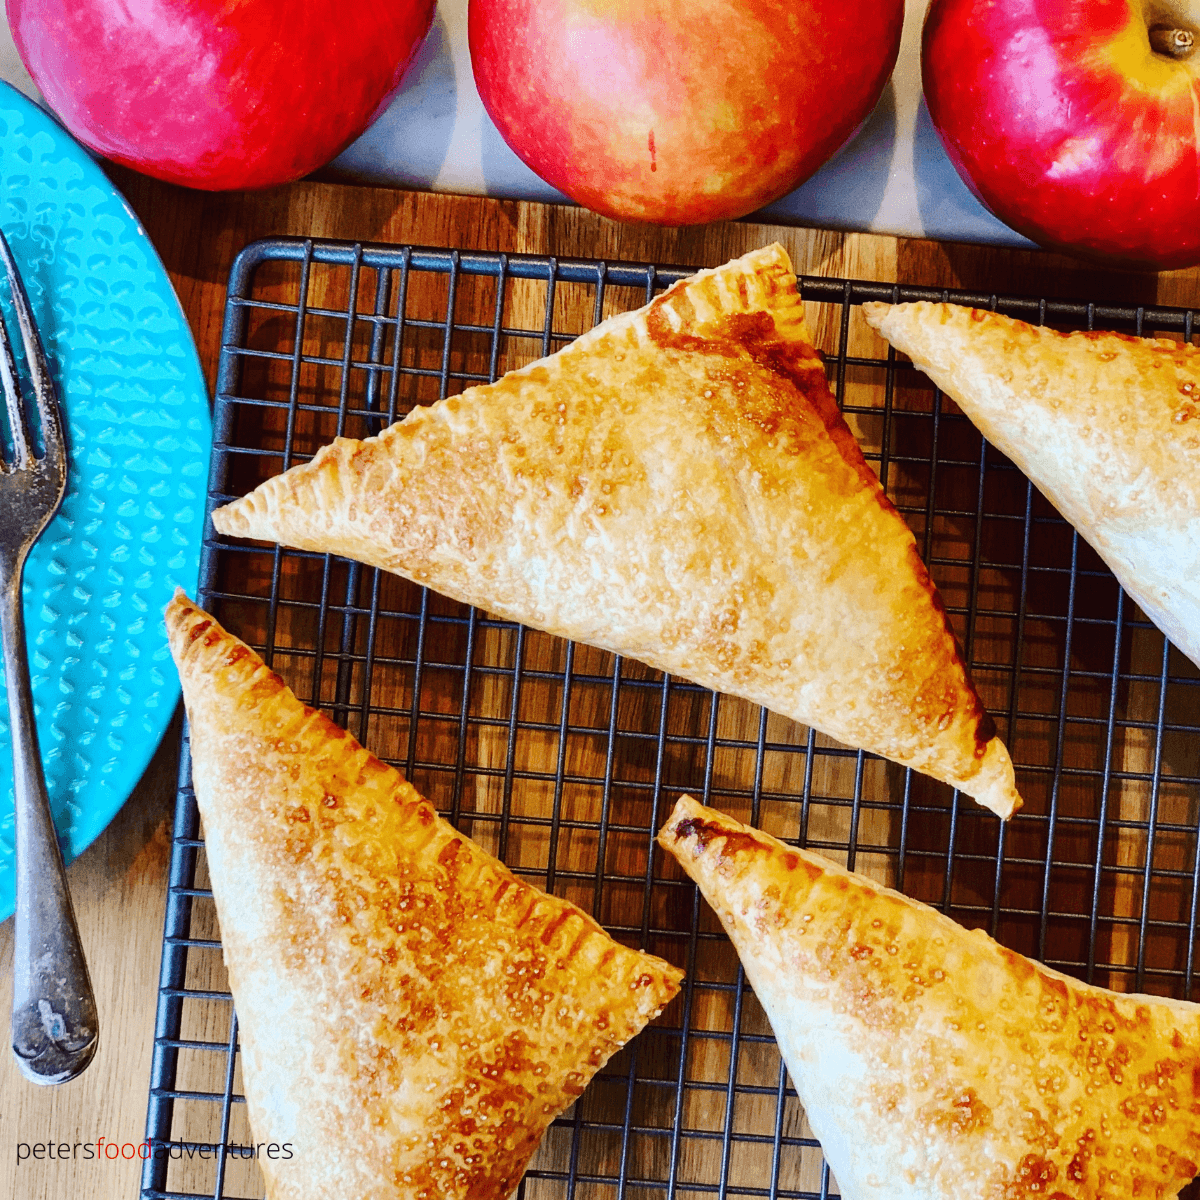 Apple Turnovers with Puff Pastry are an autumn favorite, easy to make apple hand pies. Perfect way to use up apples during harvest. Made with puff pastry, freeze them for later, or drizzle them with a cream cheese icing. Perfect for breakfast or for dessert!